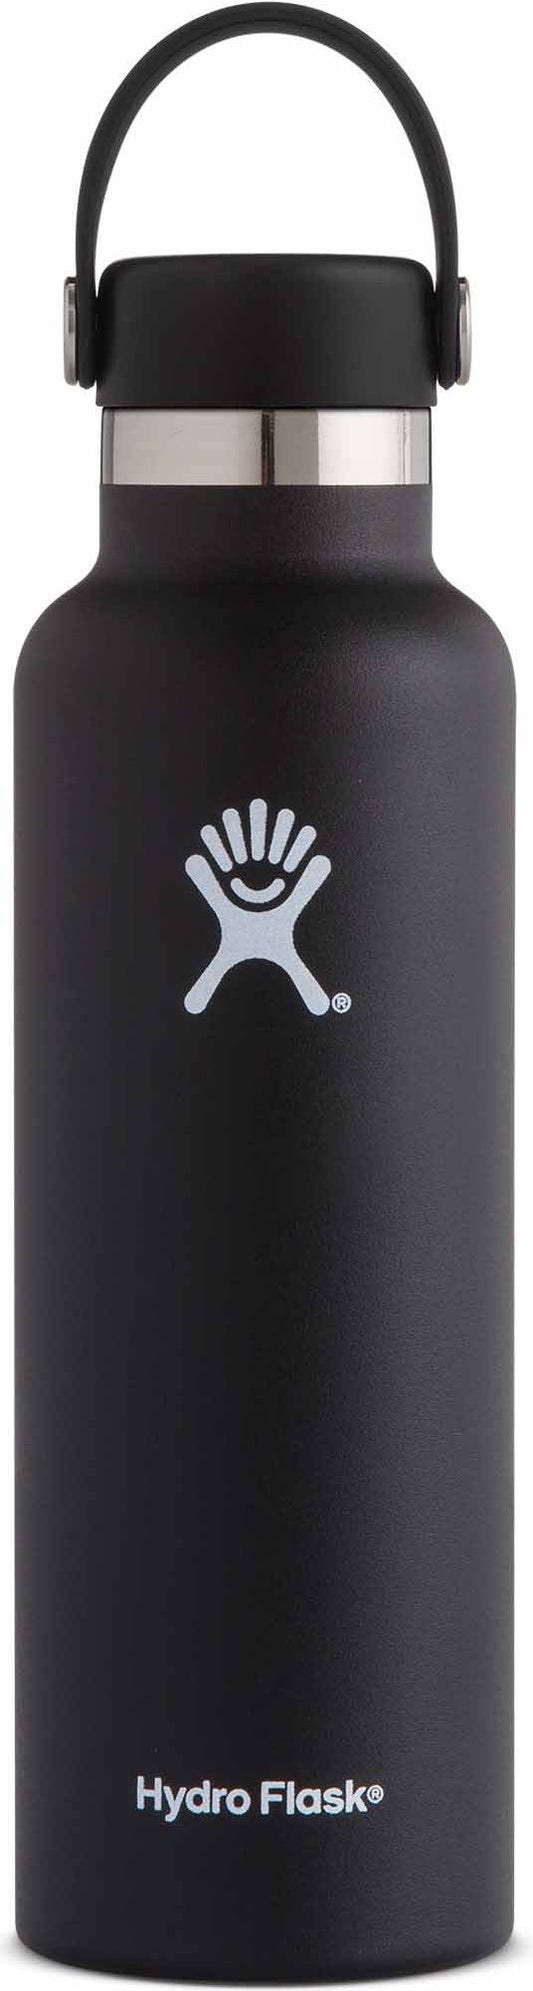 Hydro Flask Accessories 24oz Standard Mouth Black